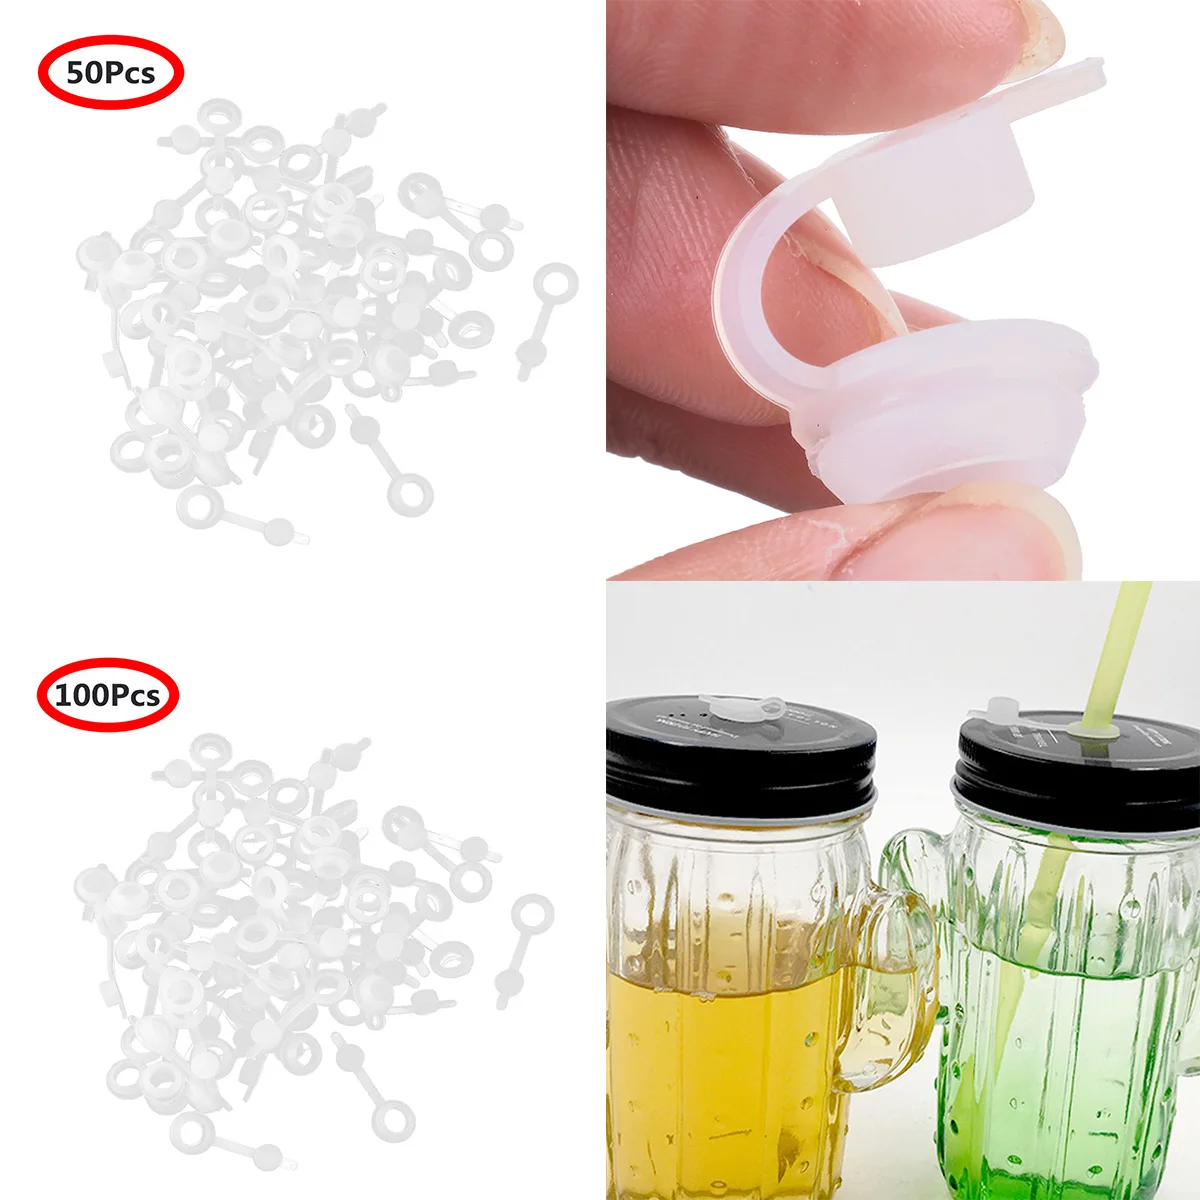 CHICTRY Silicone Straw Hole Grommets with Attached Plugs for Mason Jar Lids Sauerkraut Kimchi Fermenter Homebrewing Wine and Beer Making Bucket Fermentation Airlock White 50Pcs 